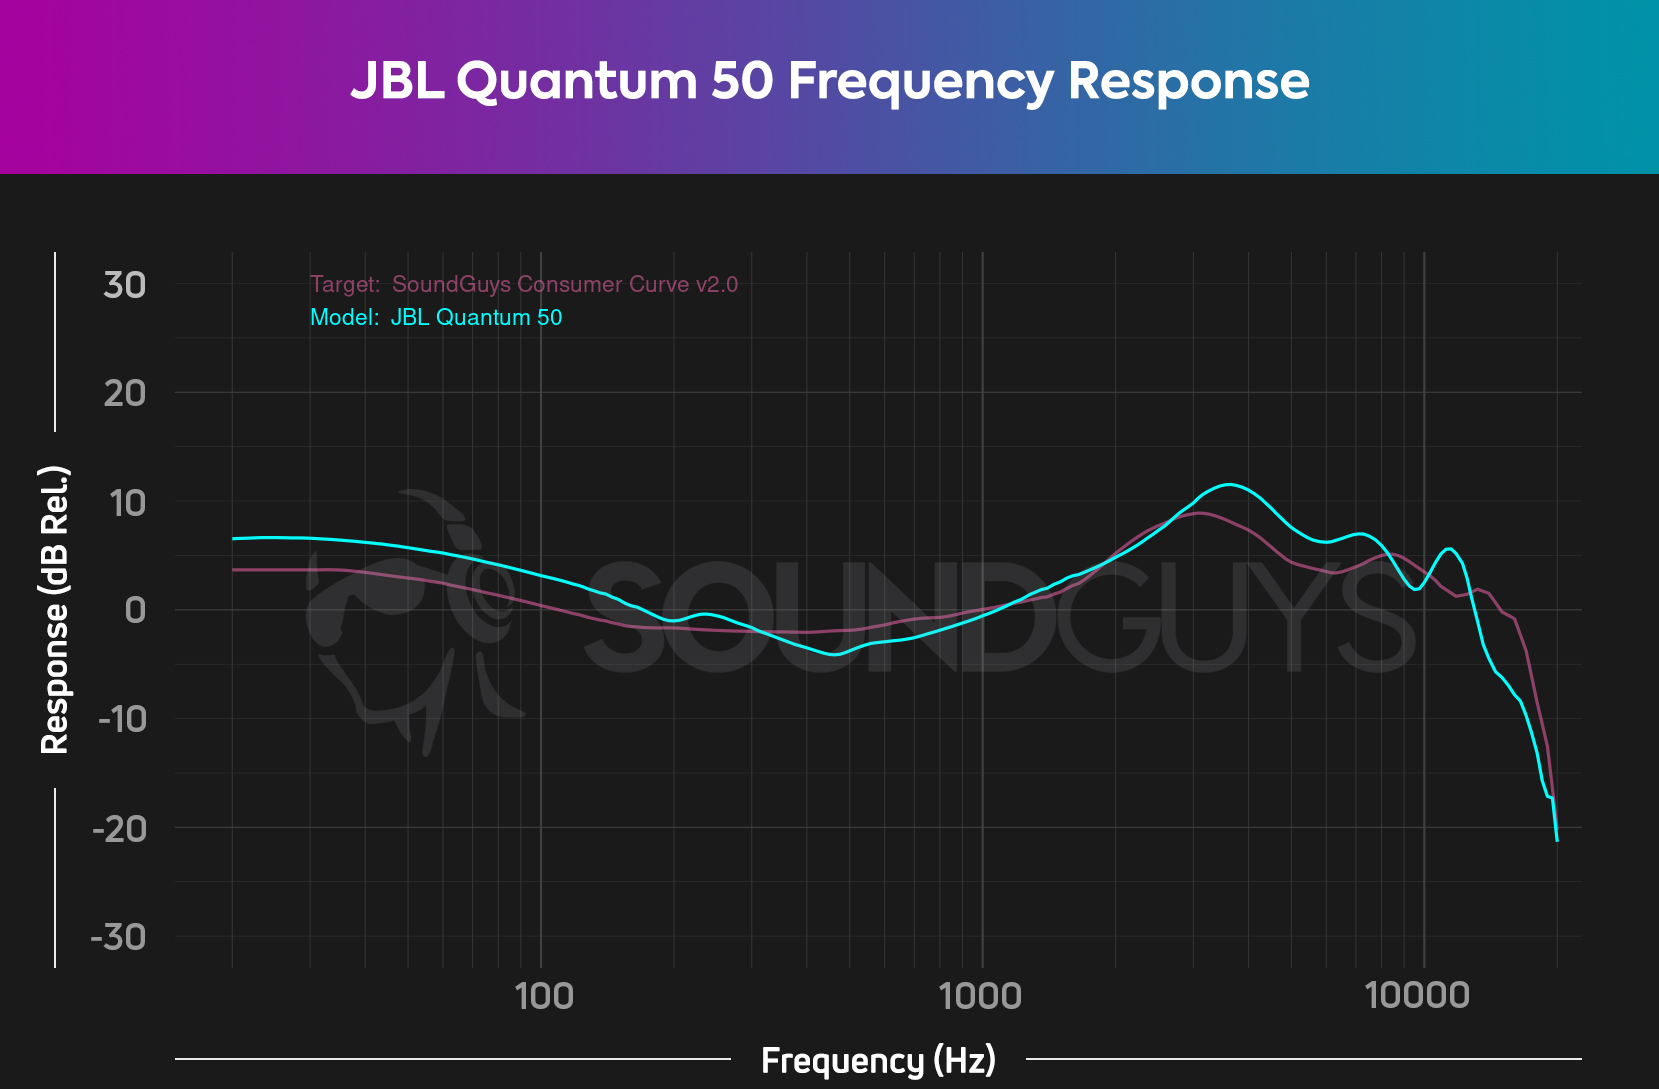 A chart depicts the frequency response chart for the JBL Quantum 50 wired earbuds which closely follows our consumer target curve.